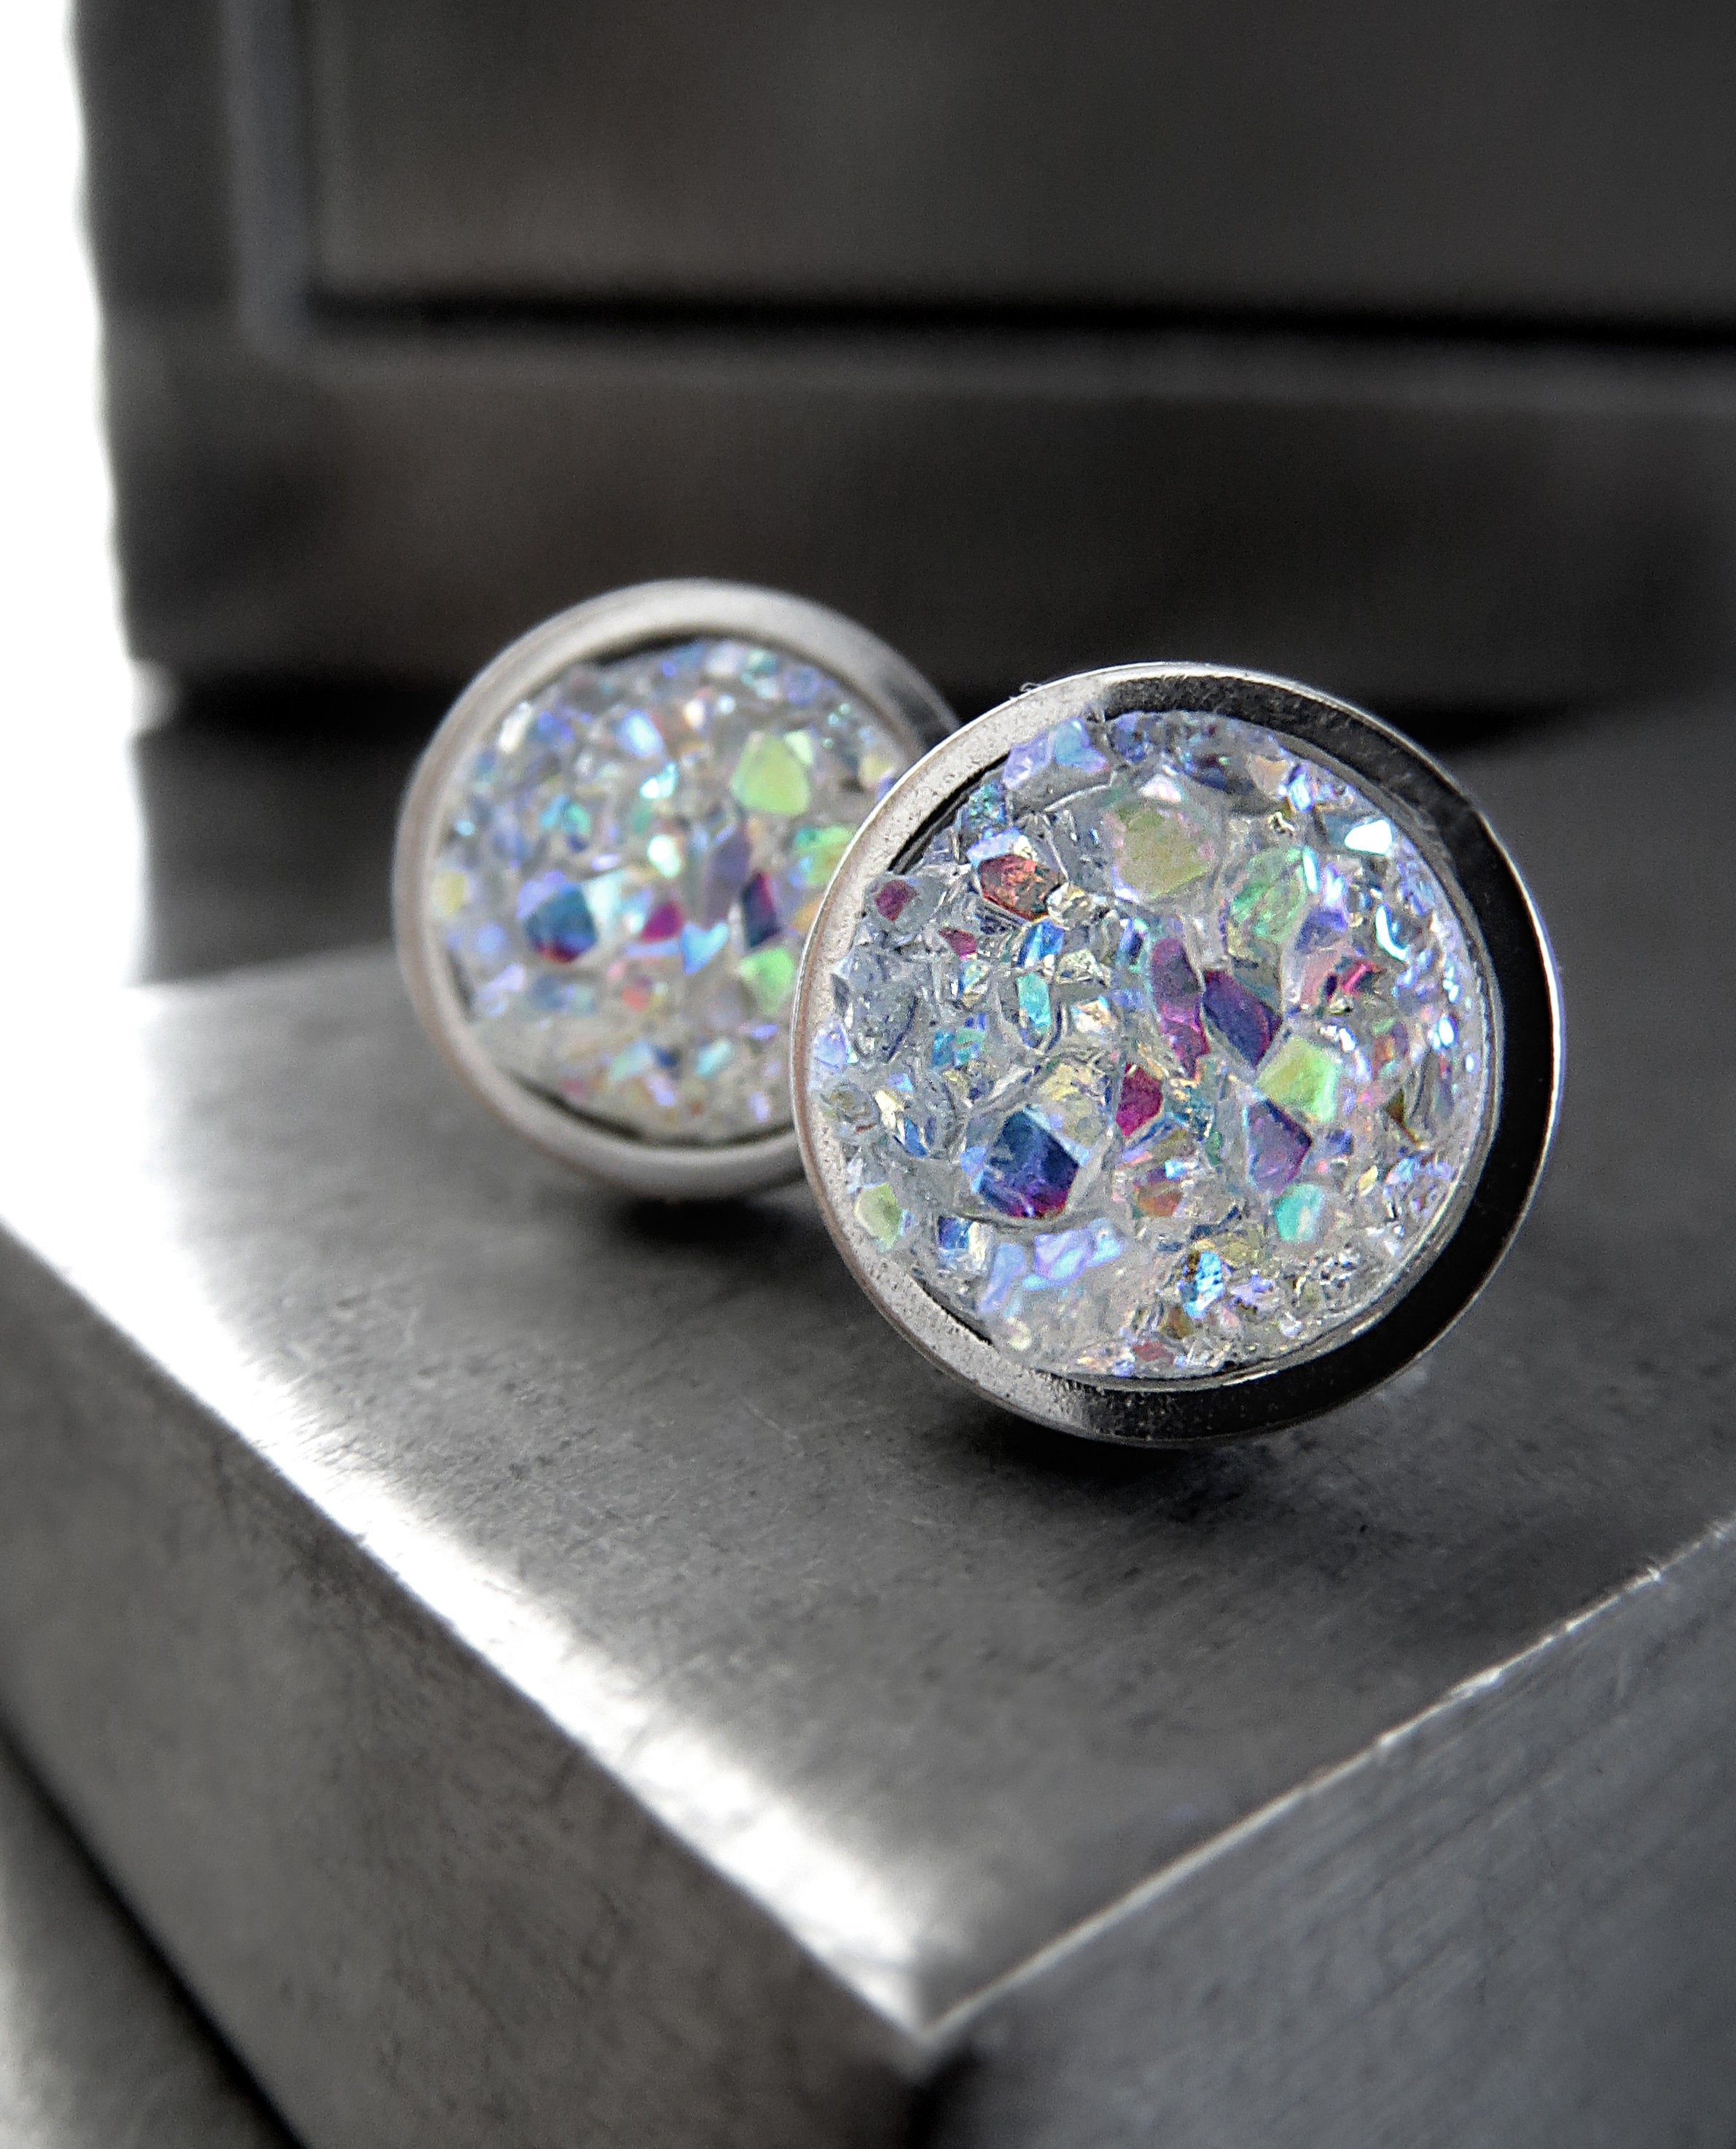 AURORA ICE - Shimmer Iridescent Stud Earrings with Simulated Druzy - Unisex Womens Large Stud Earrings - Modern Jewelry